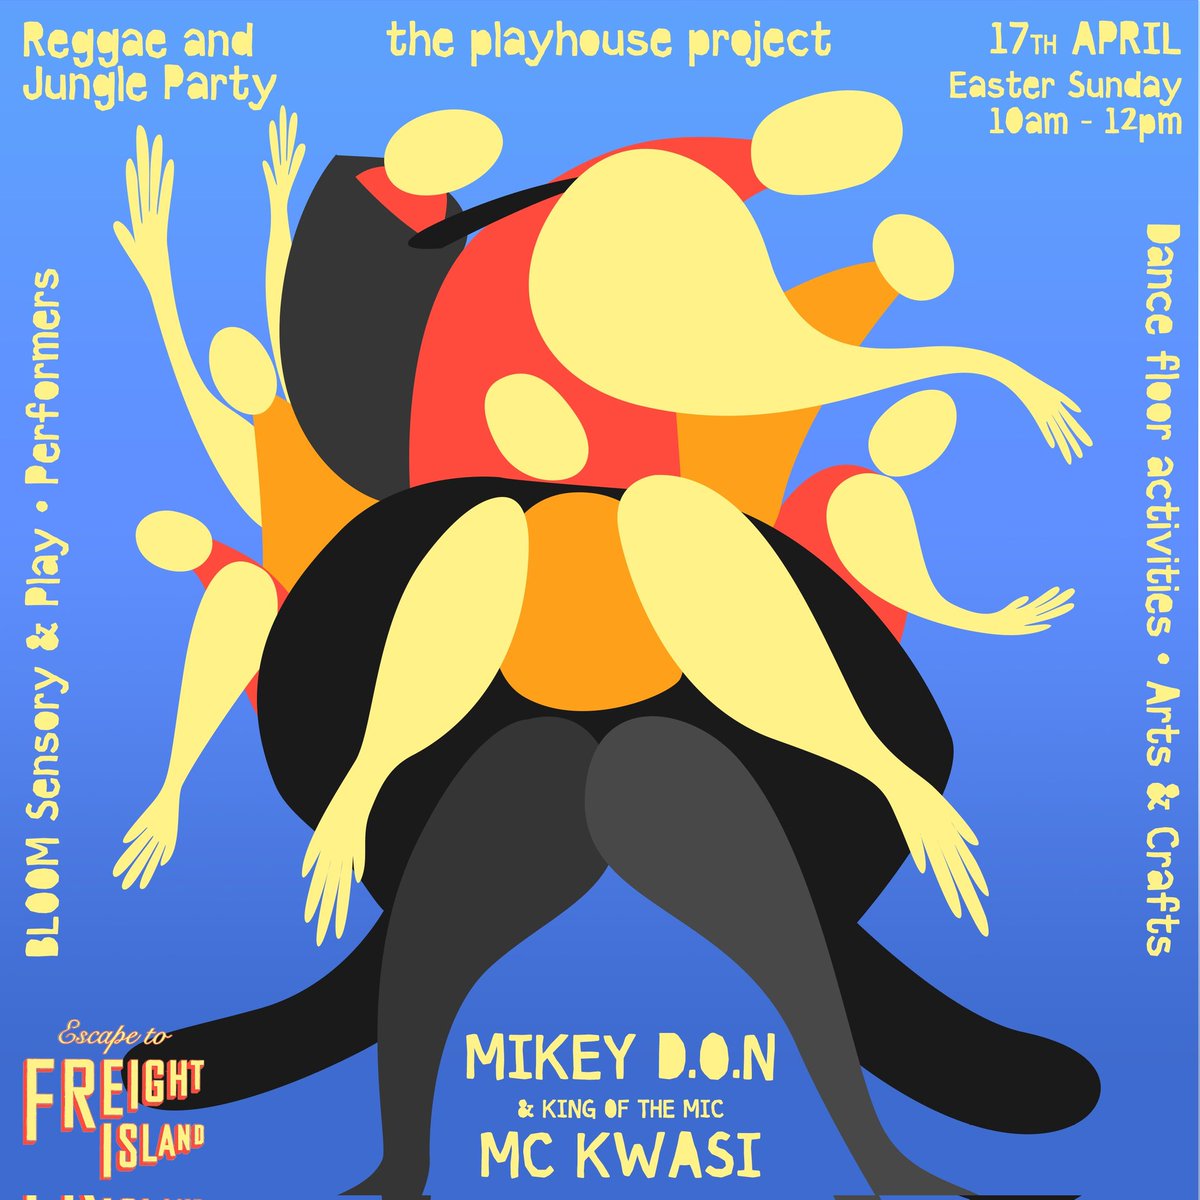 THE PLAYHOUSE PROJECT EASTER TAKEOVER with award winning Reggae & HipHop pioneer DJ Mikey D.O.N & the wonderful MC Kwasi for a Reggae & Jungle Party @freightisland 🚧 🚧 🚧 🚧 Under 3s go FREE Book here 👇 go.kaboodle.co.uk/etfi-playhouse… #familyrave #familyfun #escapetofreightisland